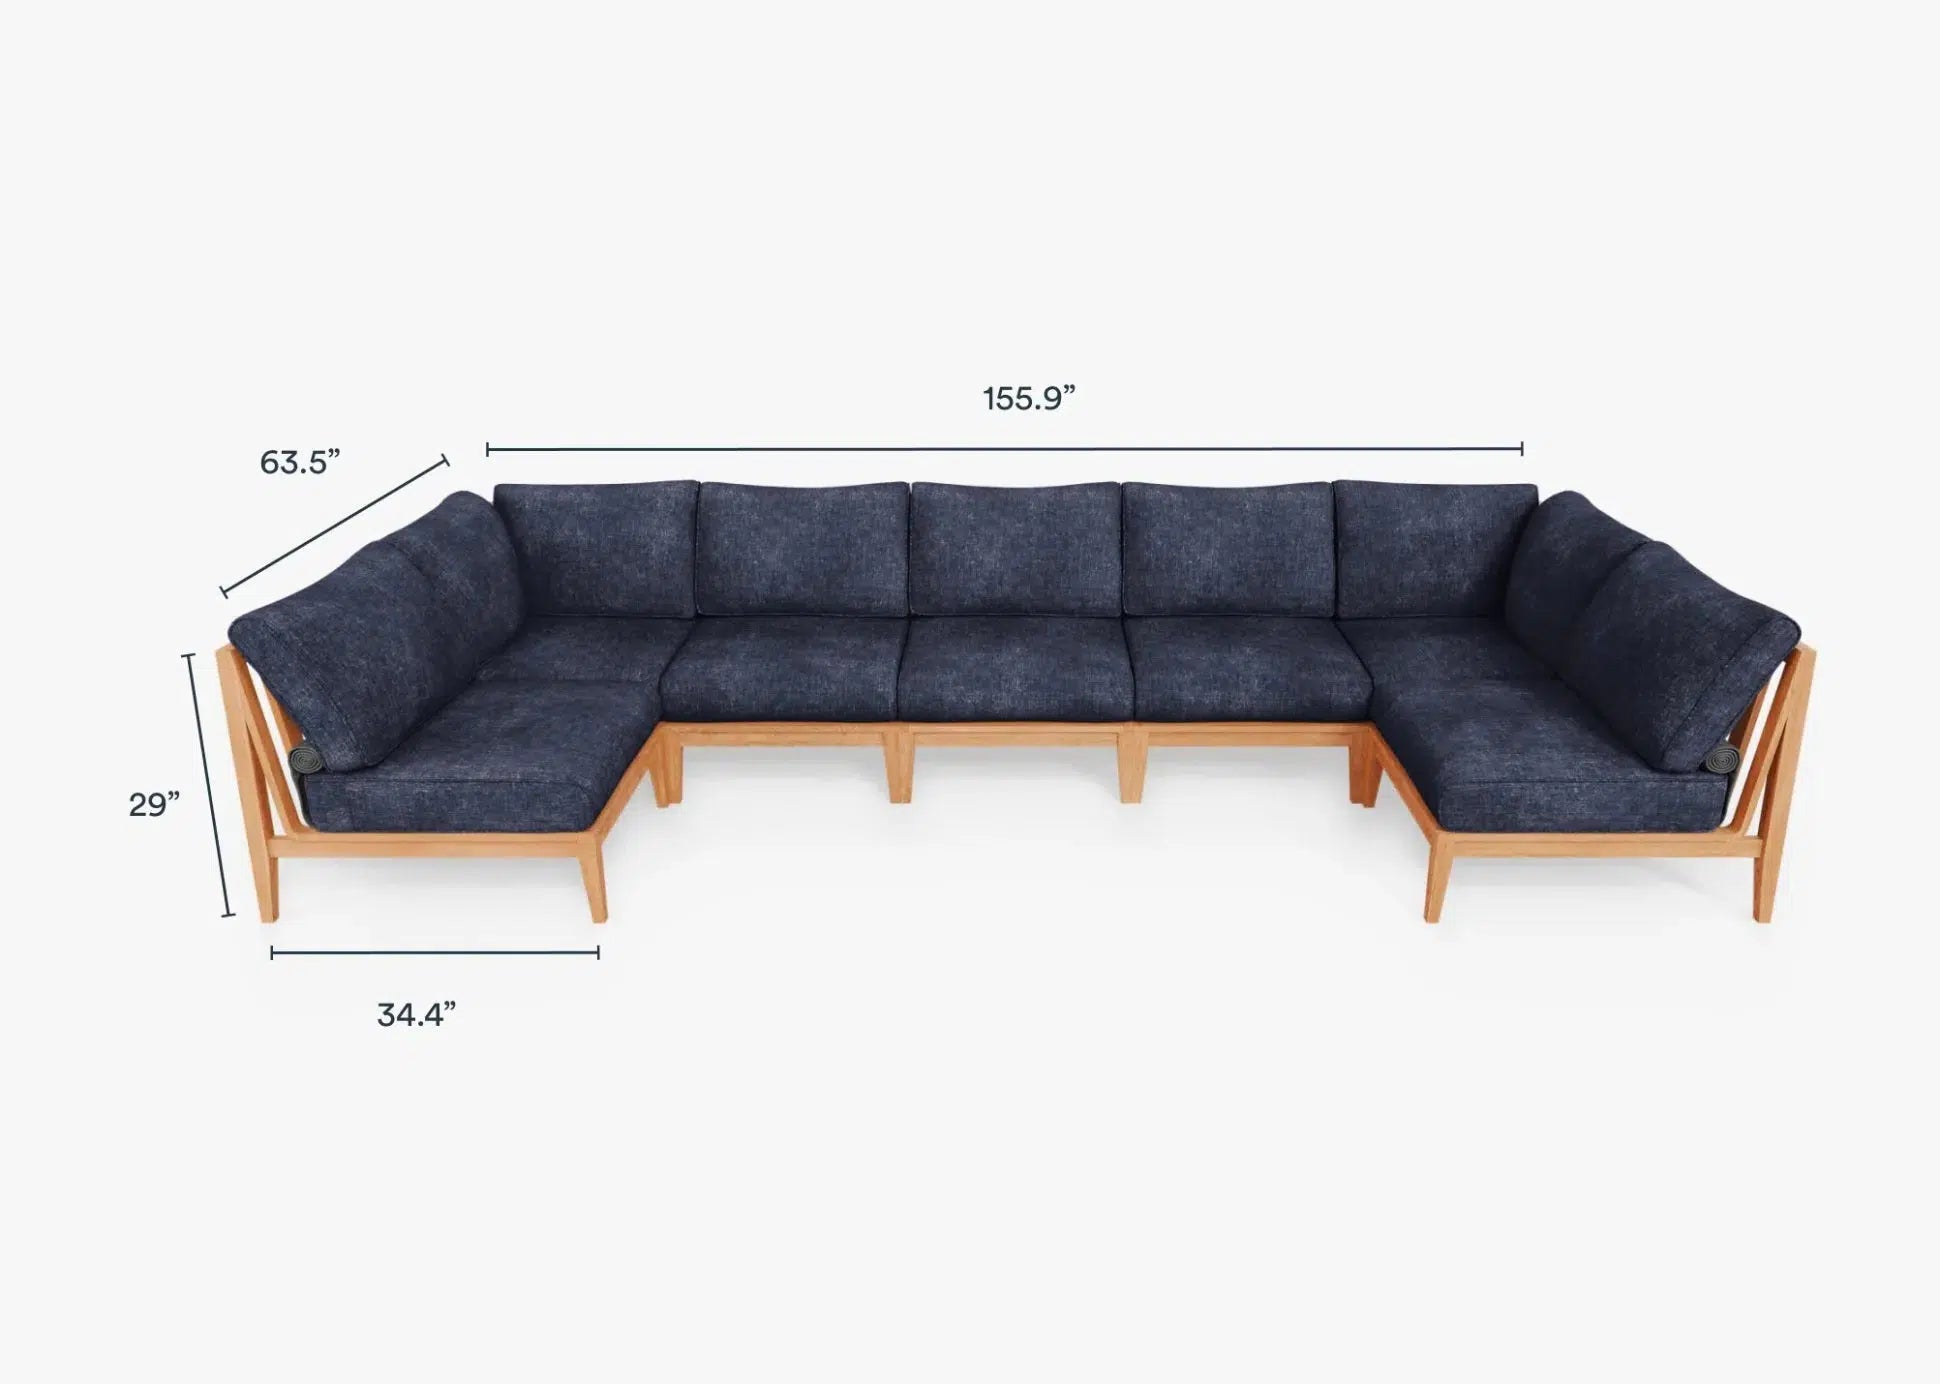 Live Outer 156" x 64" Teak Outdoor U Shape Sectional 7-Seat With Deep Sea Navy Cushion